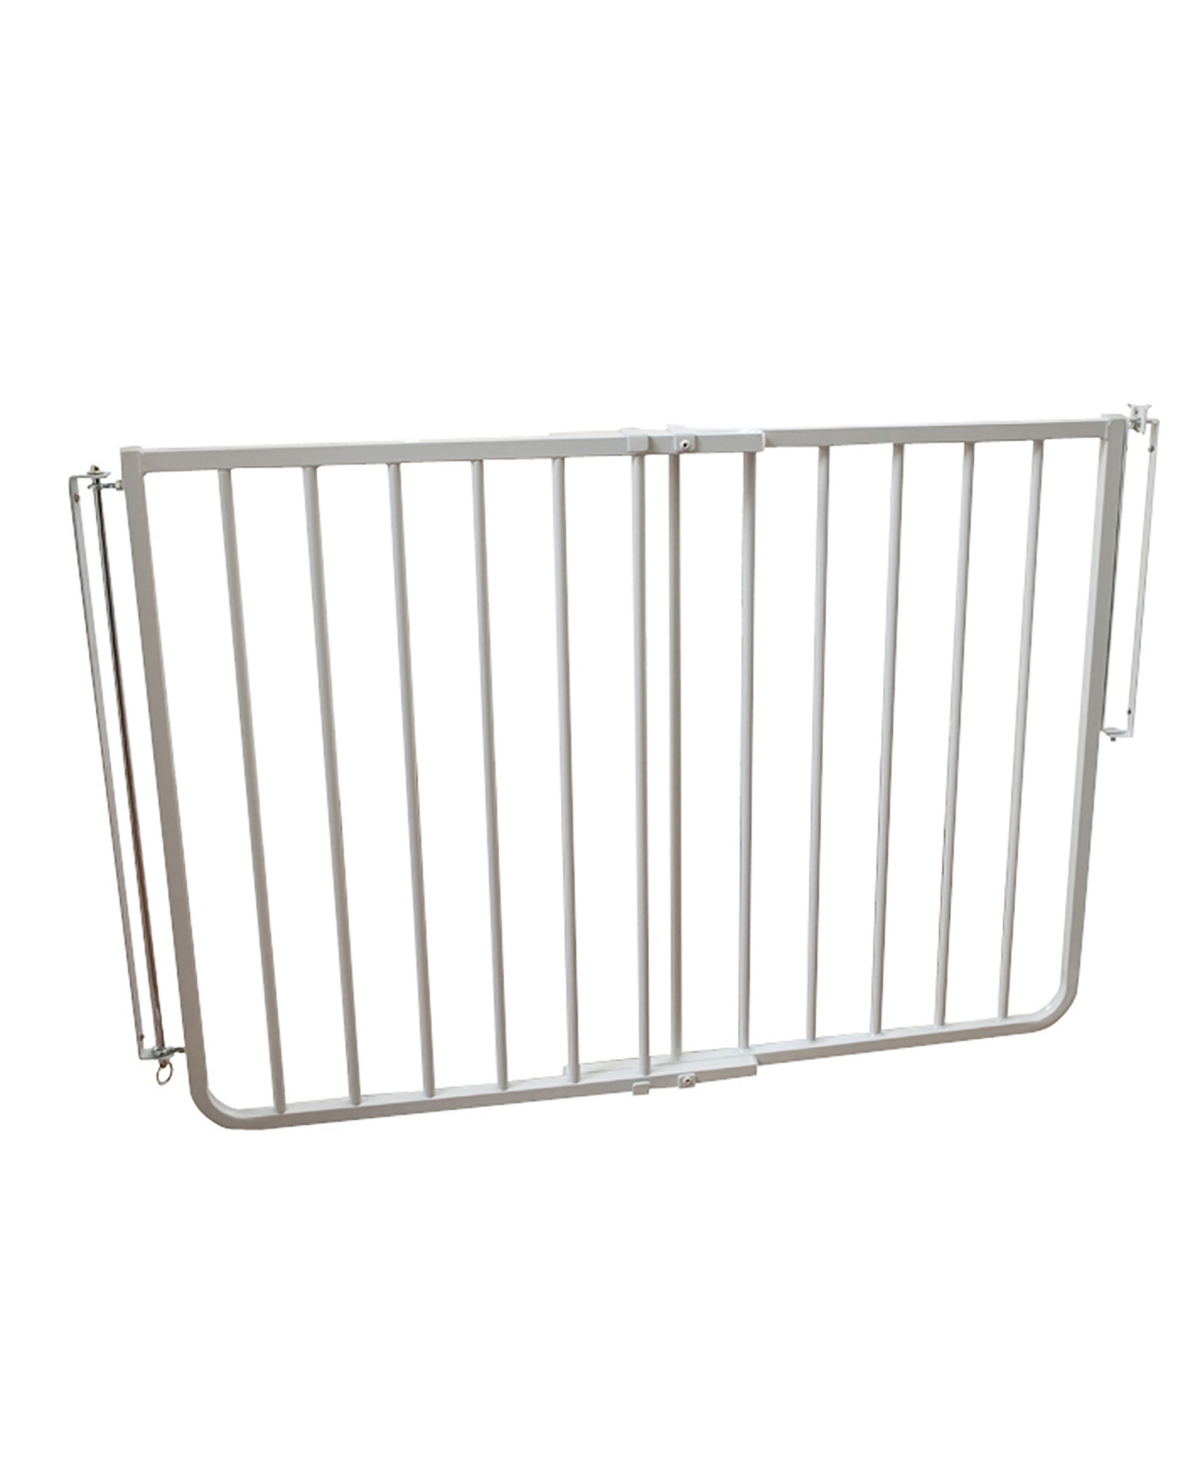 UPC 635035000314 product image for Outdoor Angle Baby Gate | upcitemdb.com